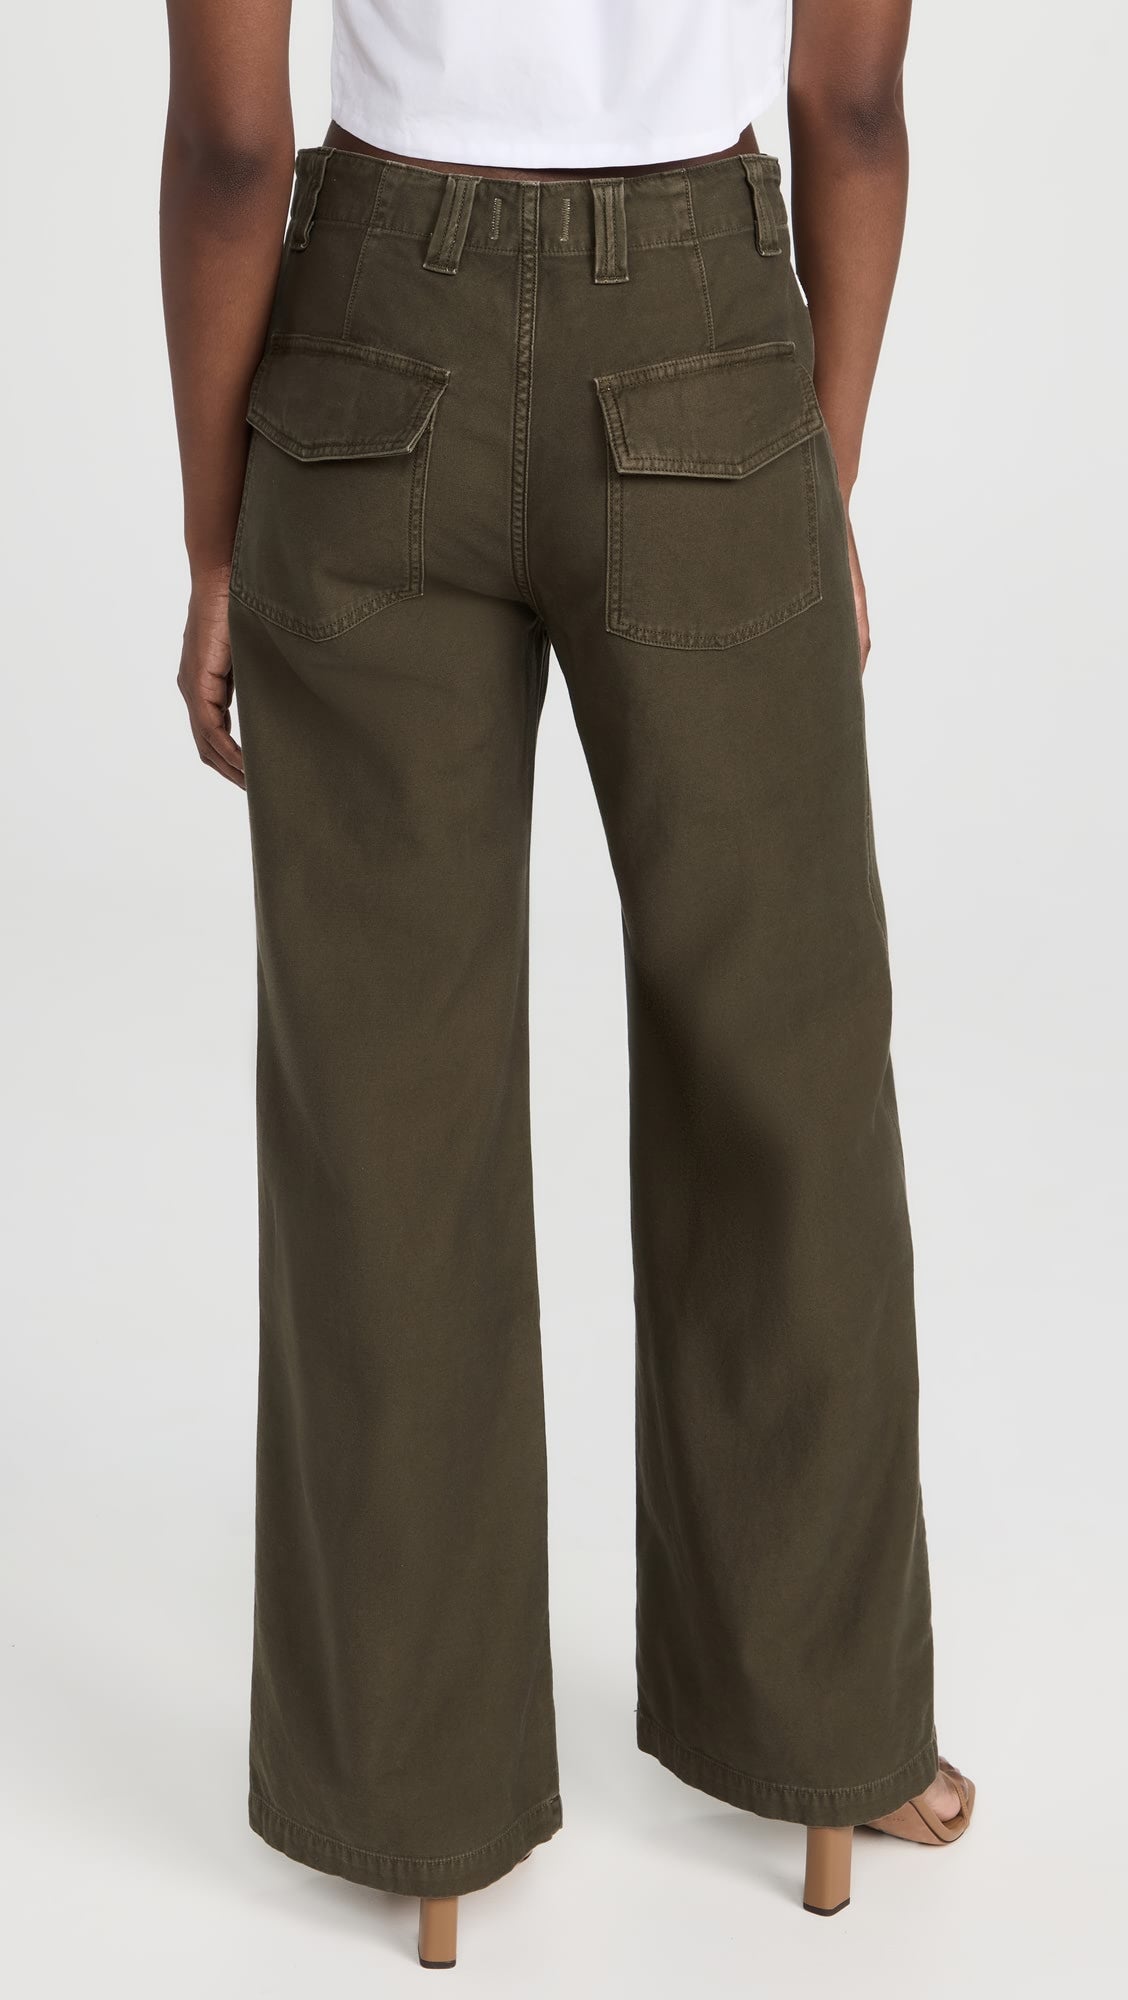 Citizen of Humanity Paloma Utility Trouser, trousers, utility pants, women's clothing